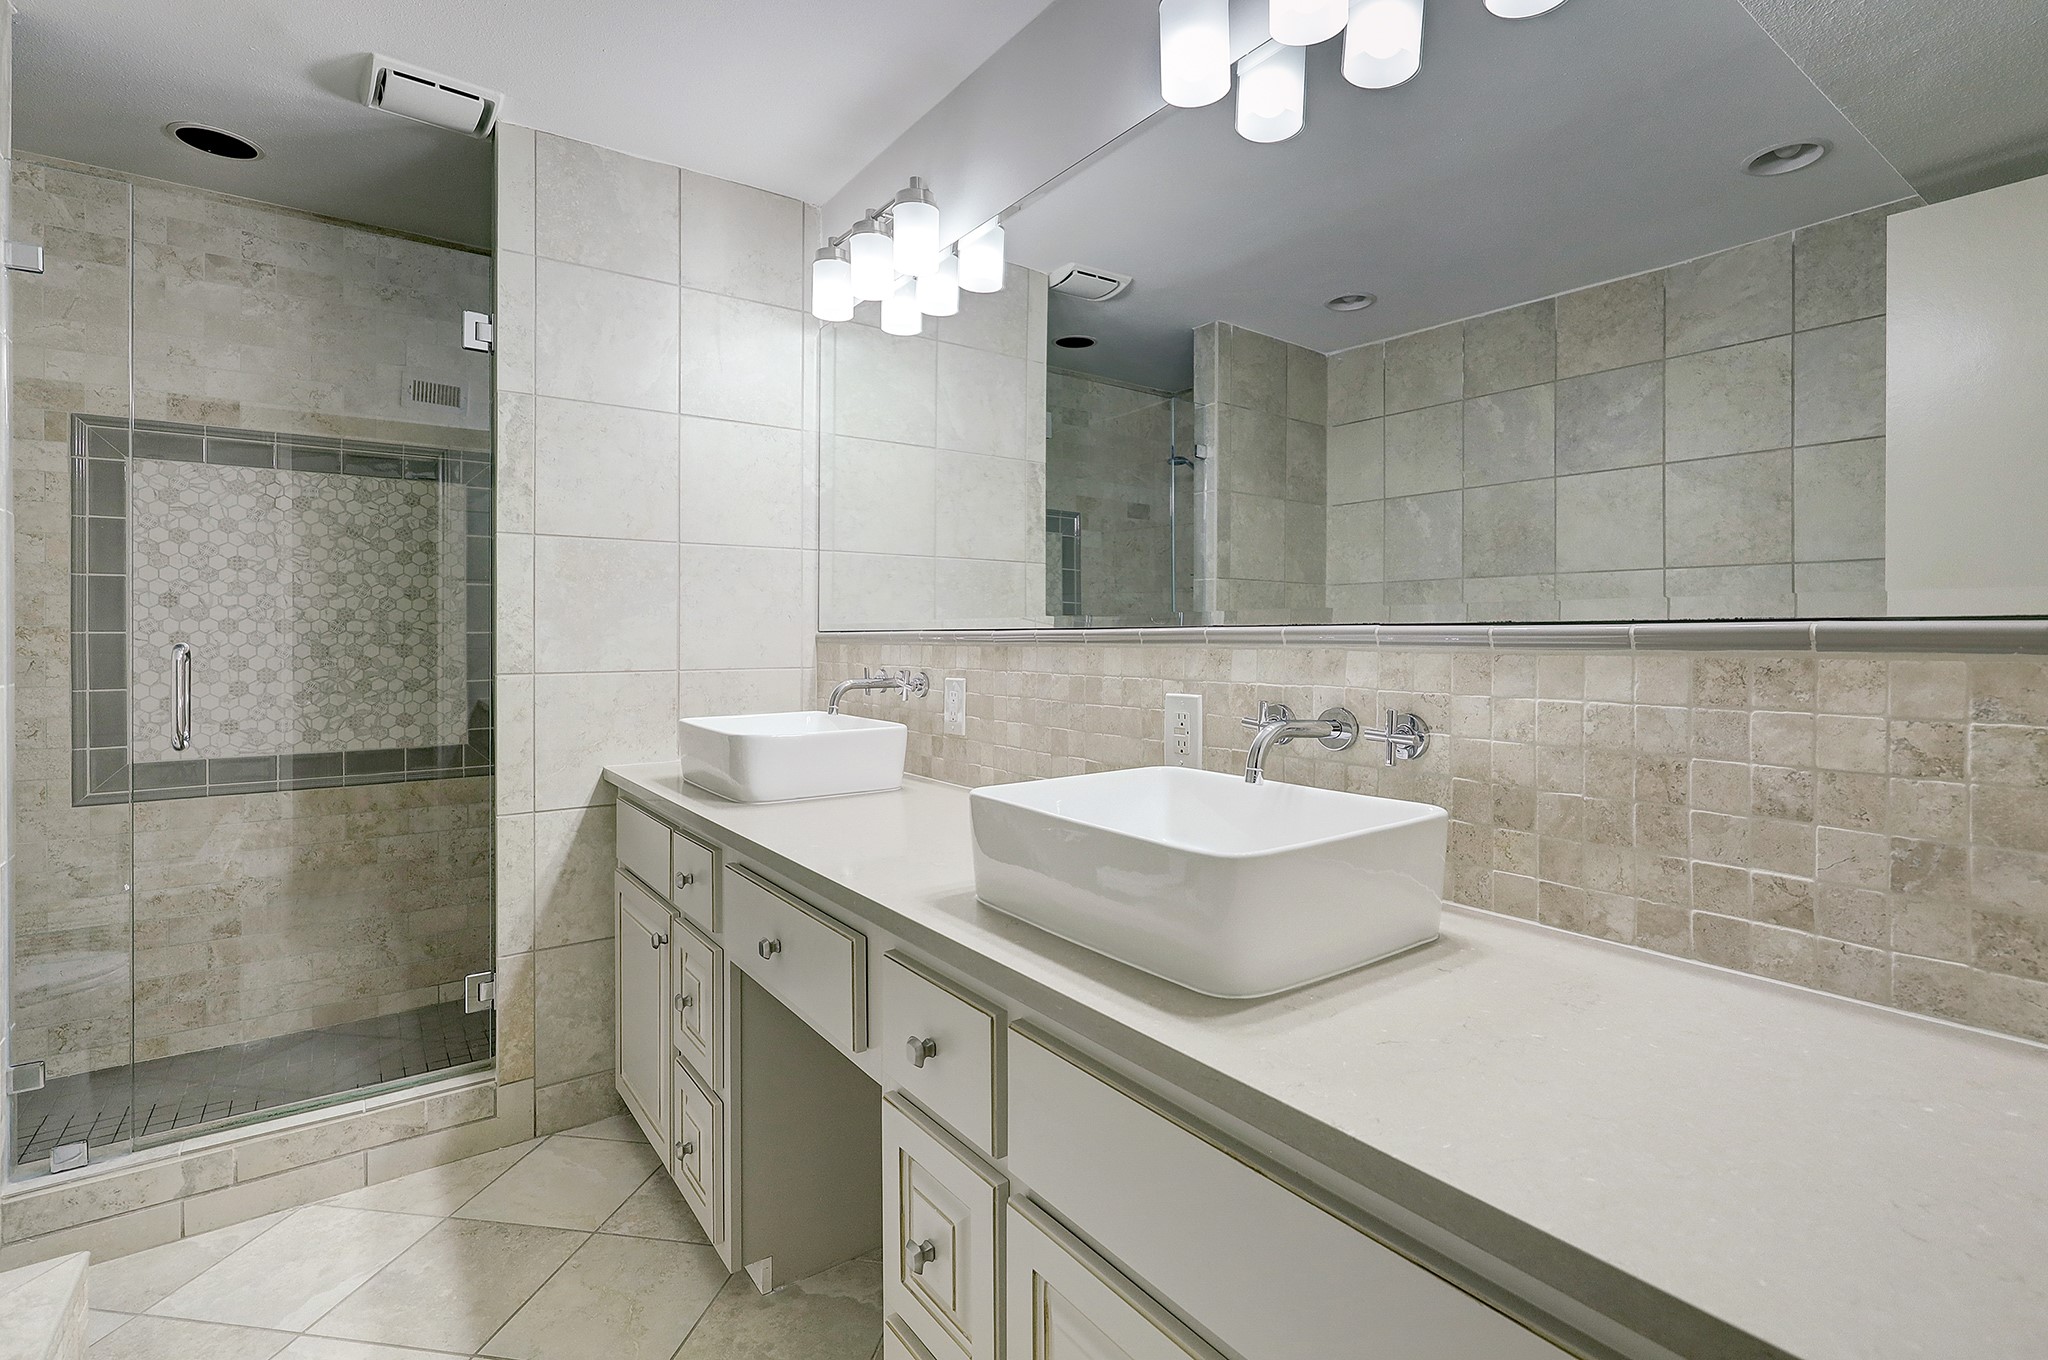 A tribute to elegance in design, expansive light gray countertops and white vessel sinks, are complemented by wall-mounted chrome fixtures. Ample cabinetry space offers abundant storage.